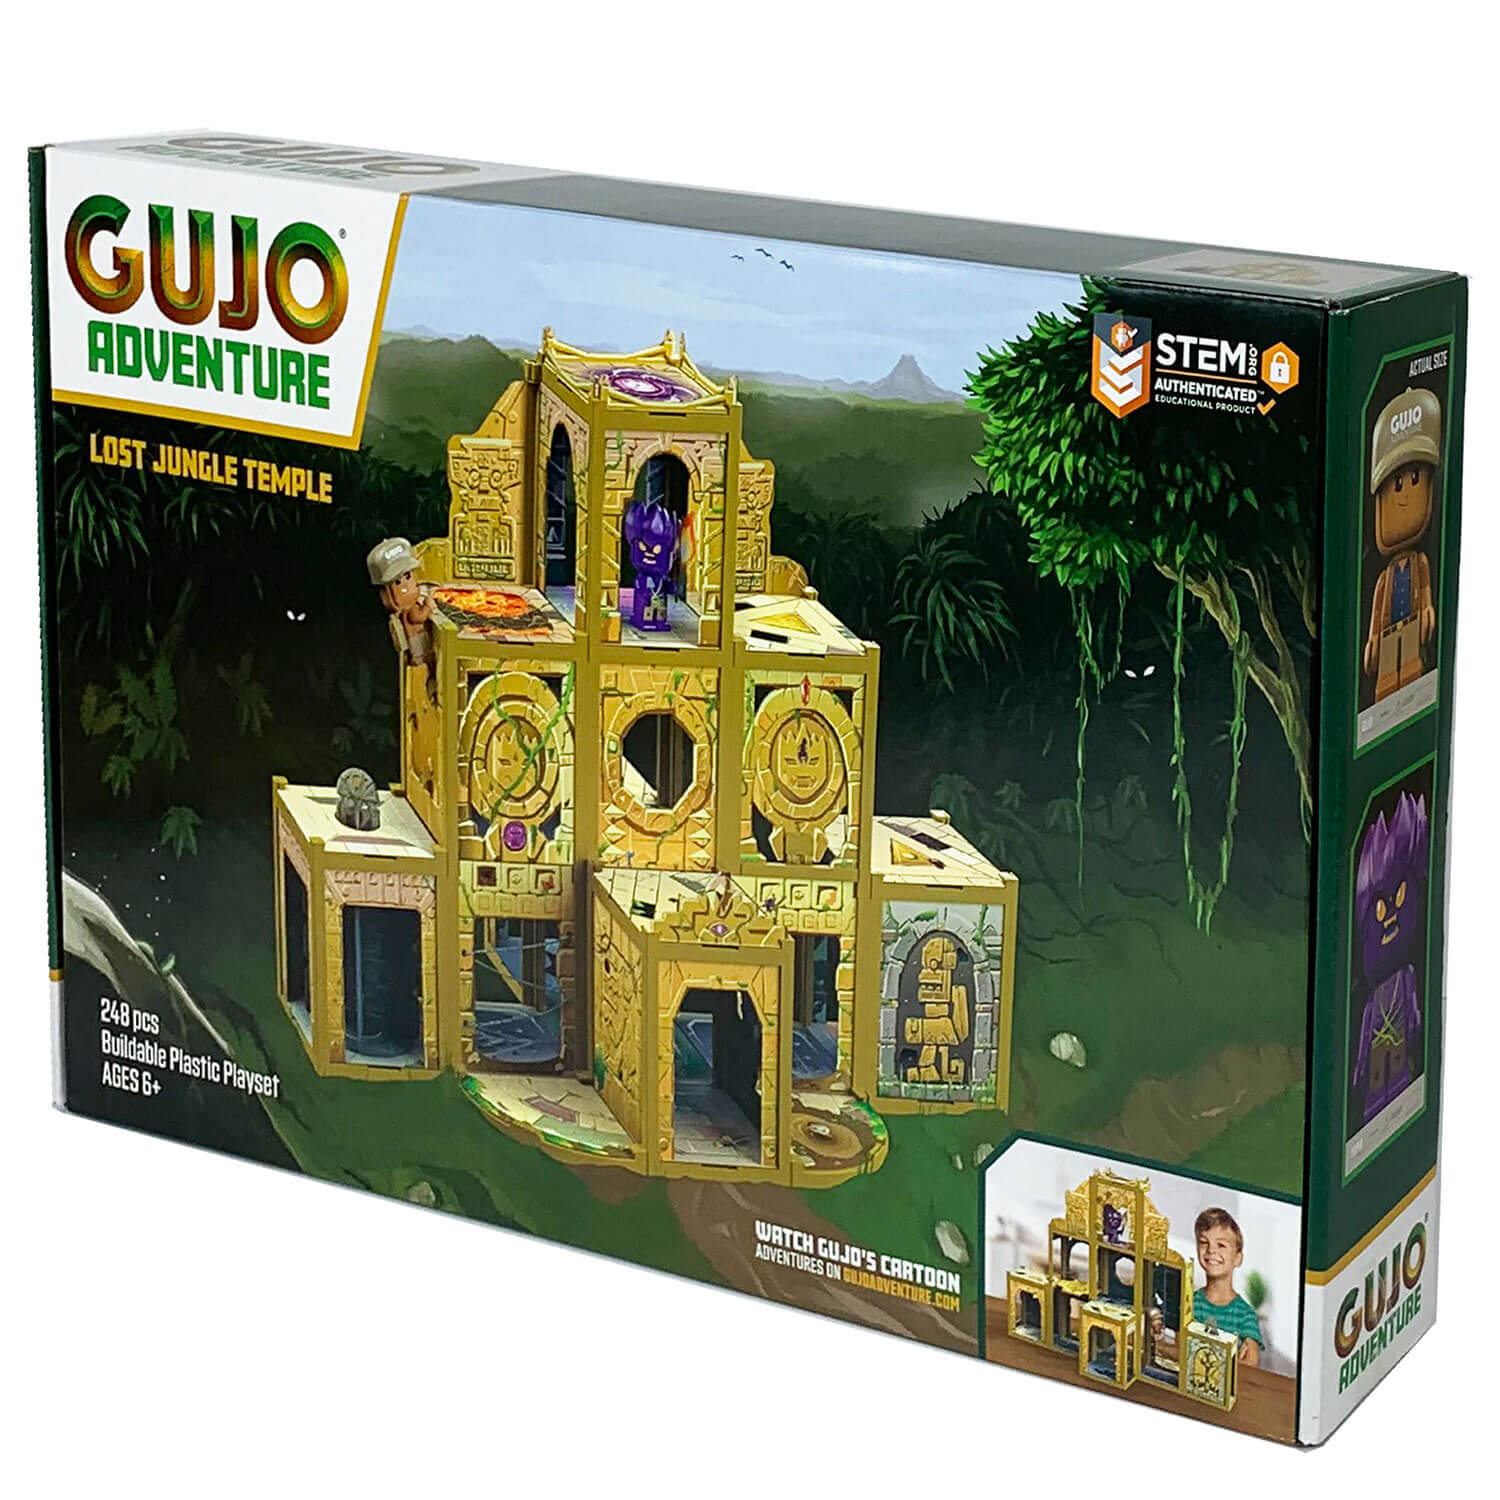 Gujo Adventure Lost Jungle Temple STEM authenticated building set for ages 6+